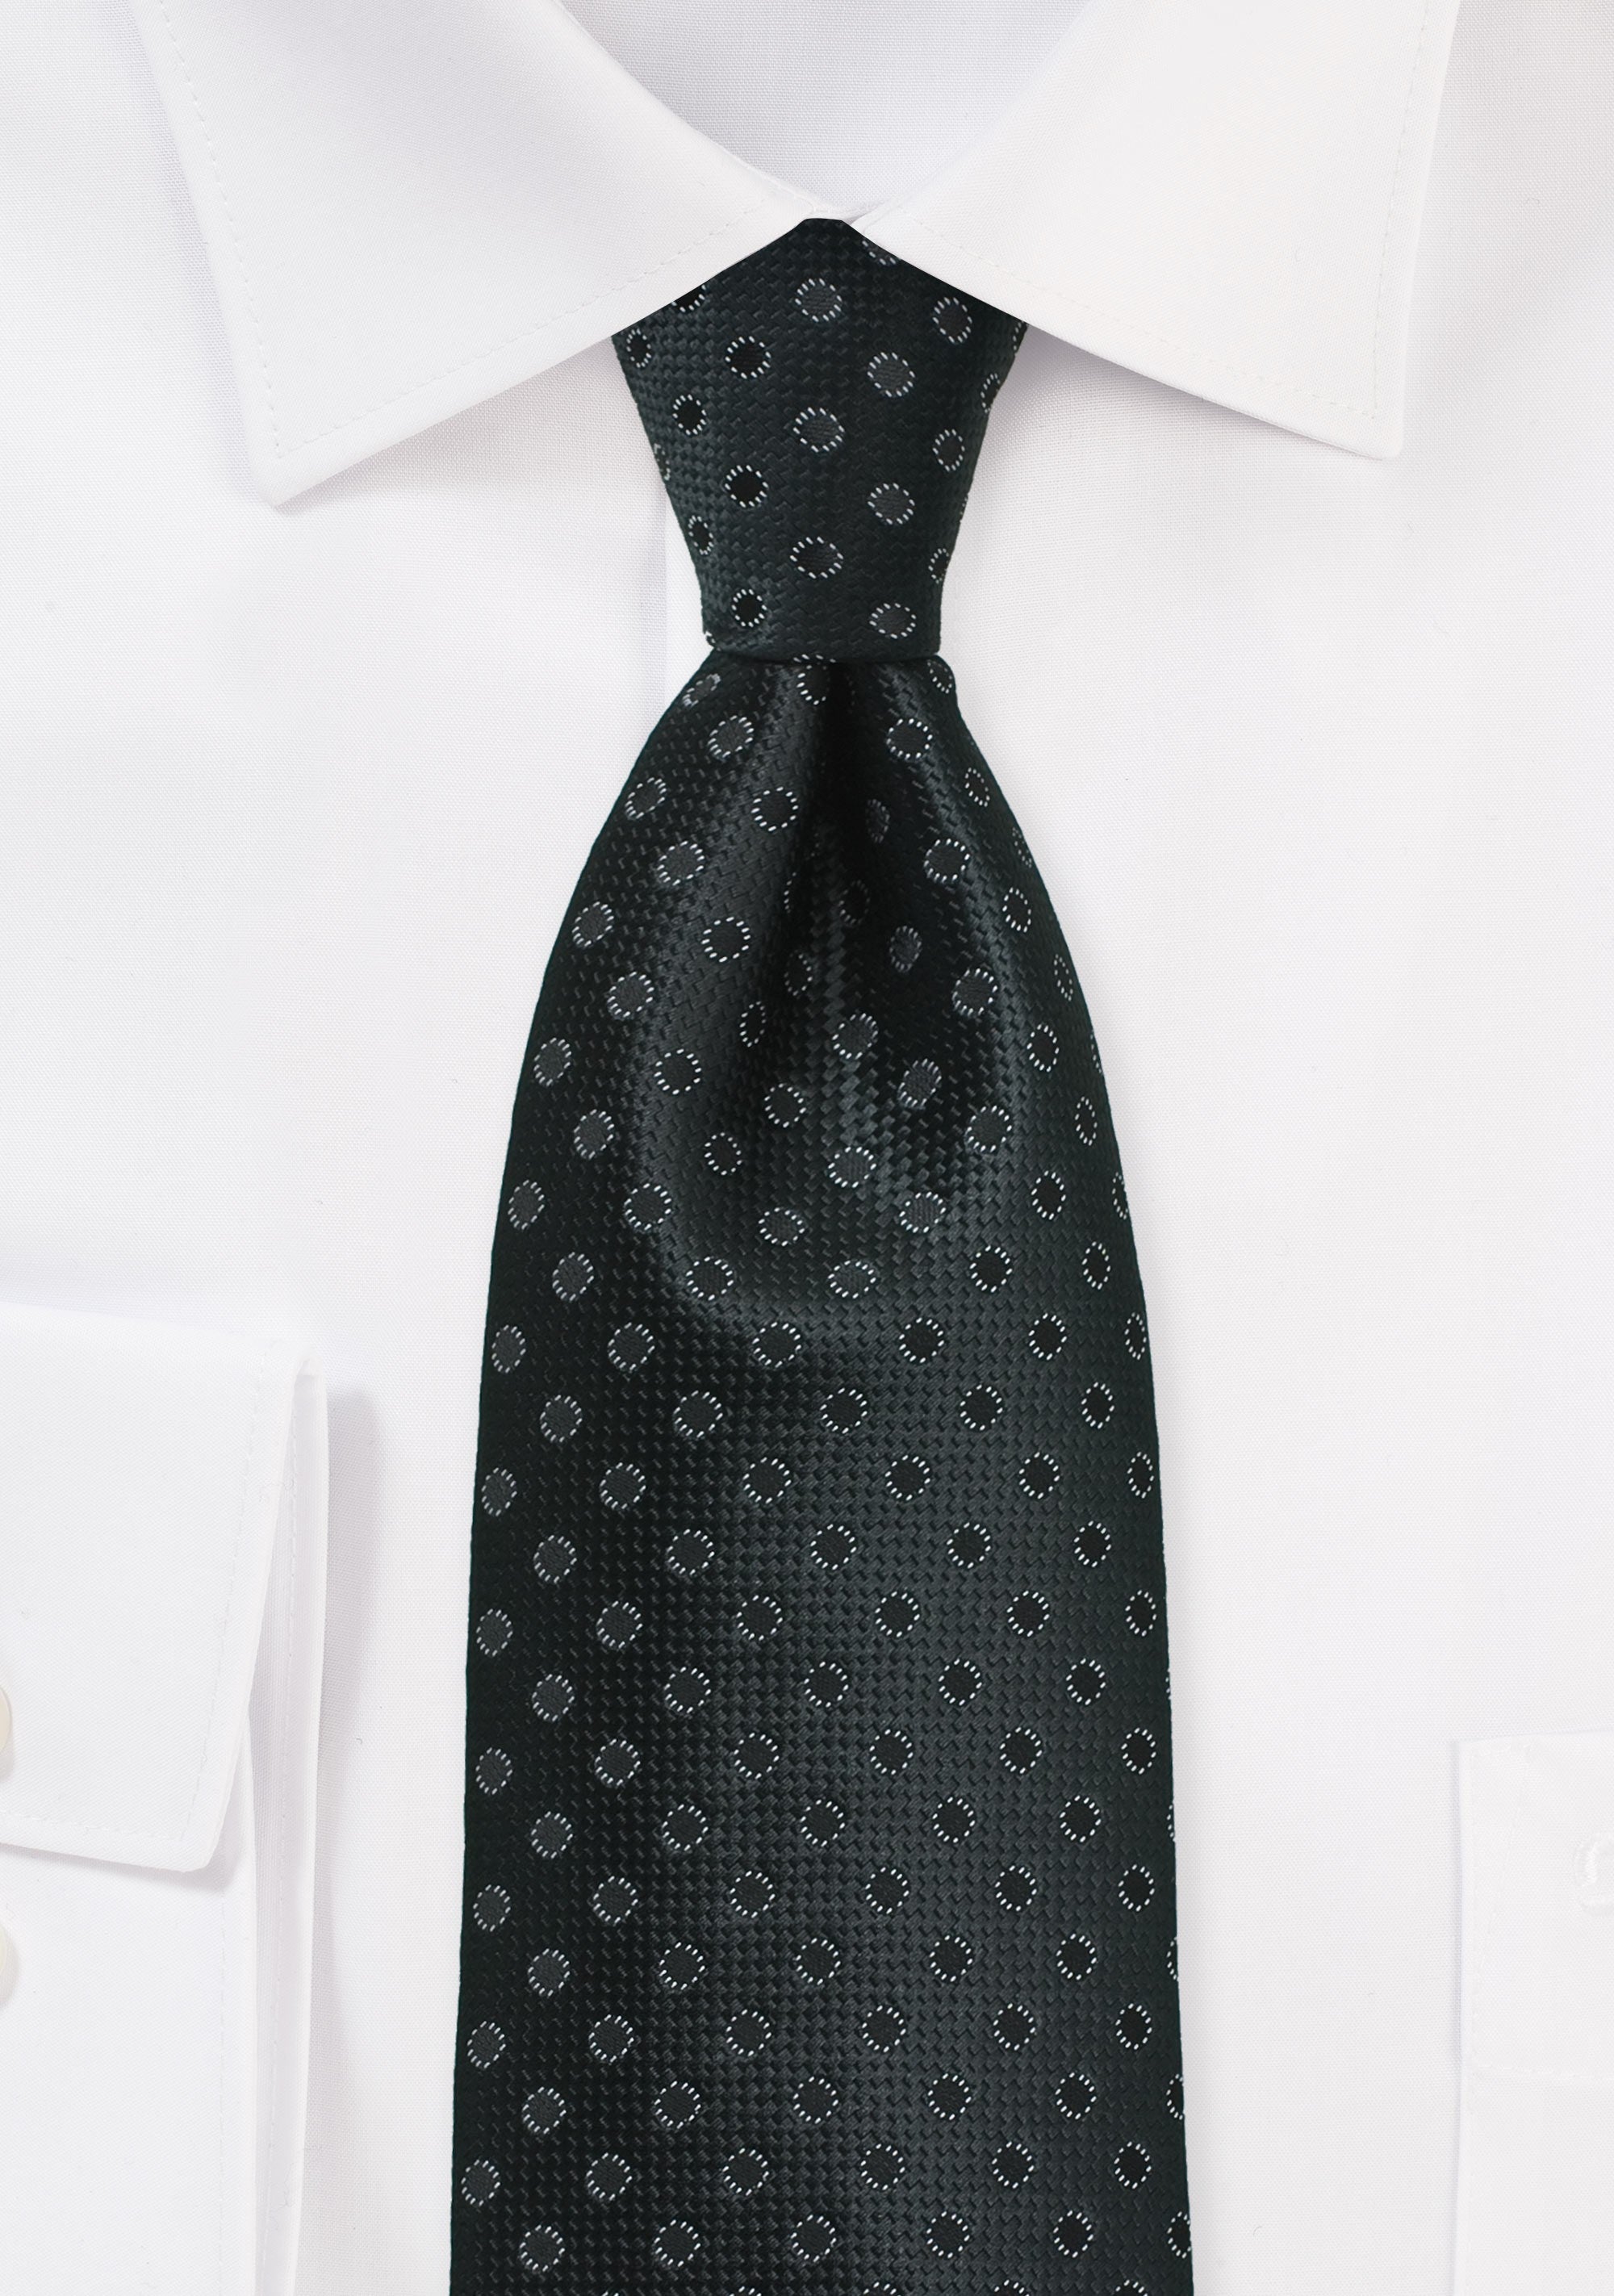 Charcoal and Black Polka Dot Necktie